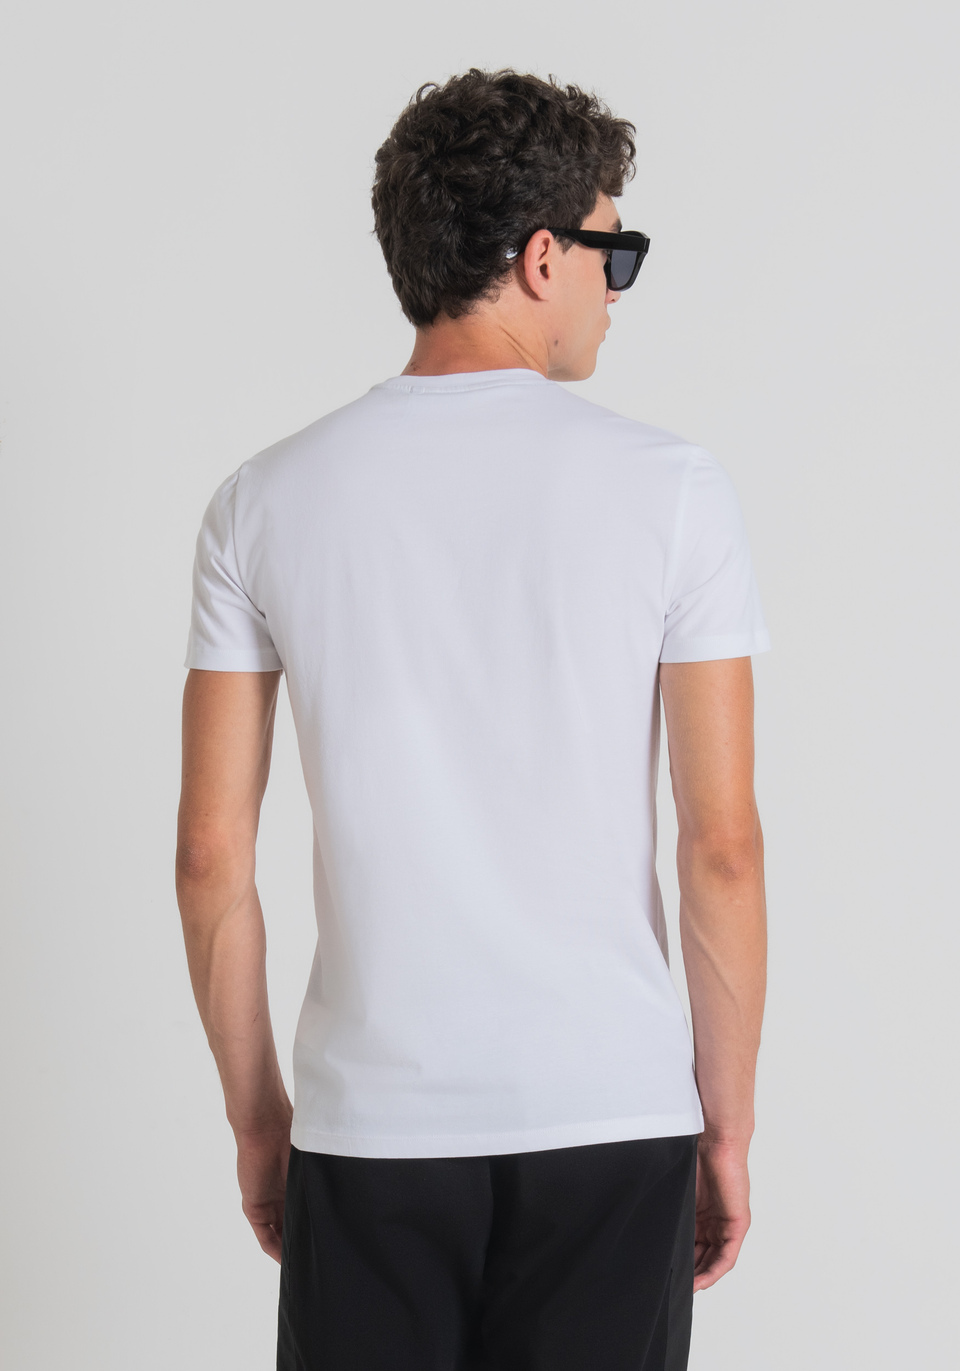 SUPER SLIM FIT T-SHIRT IN STRETCH COTTON WITH FRONT PRINT - Antony Morato Online Shop